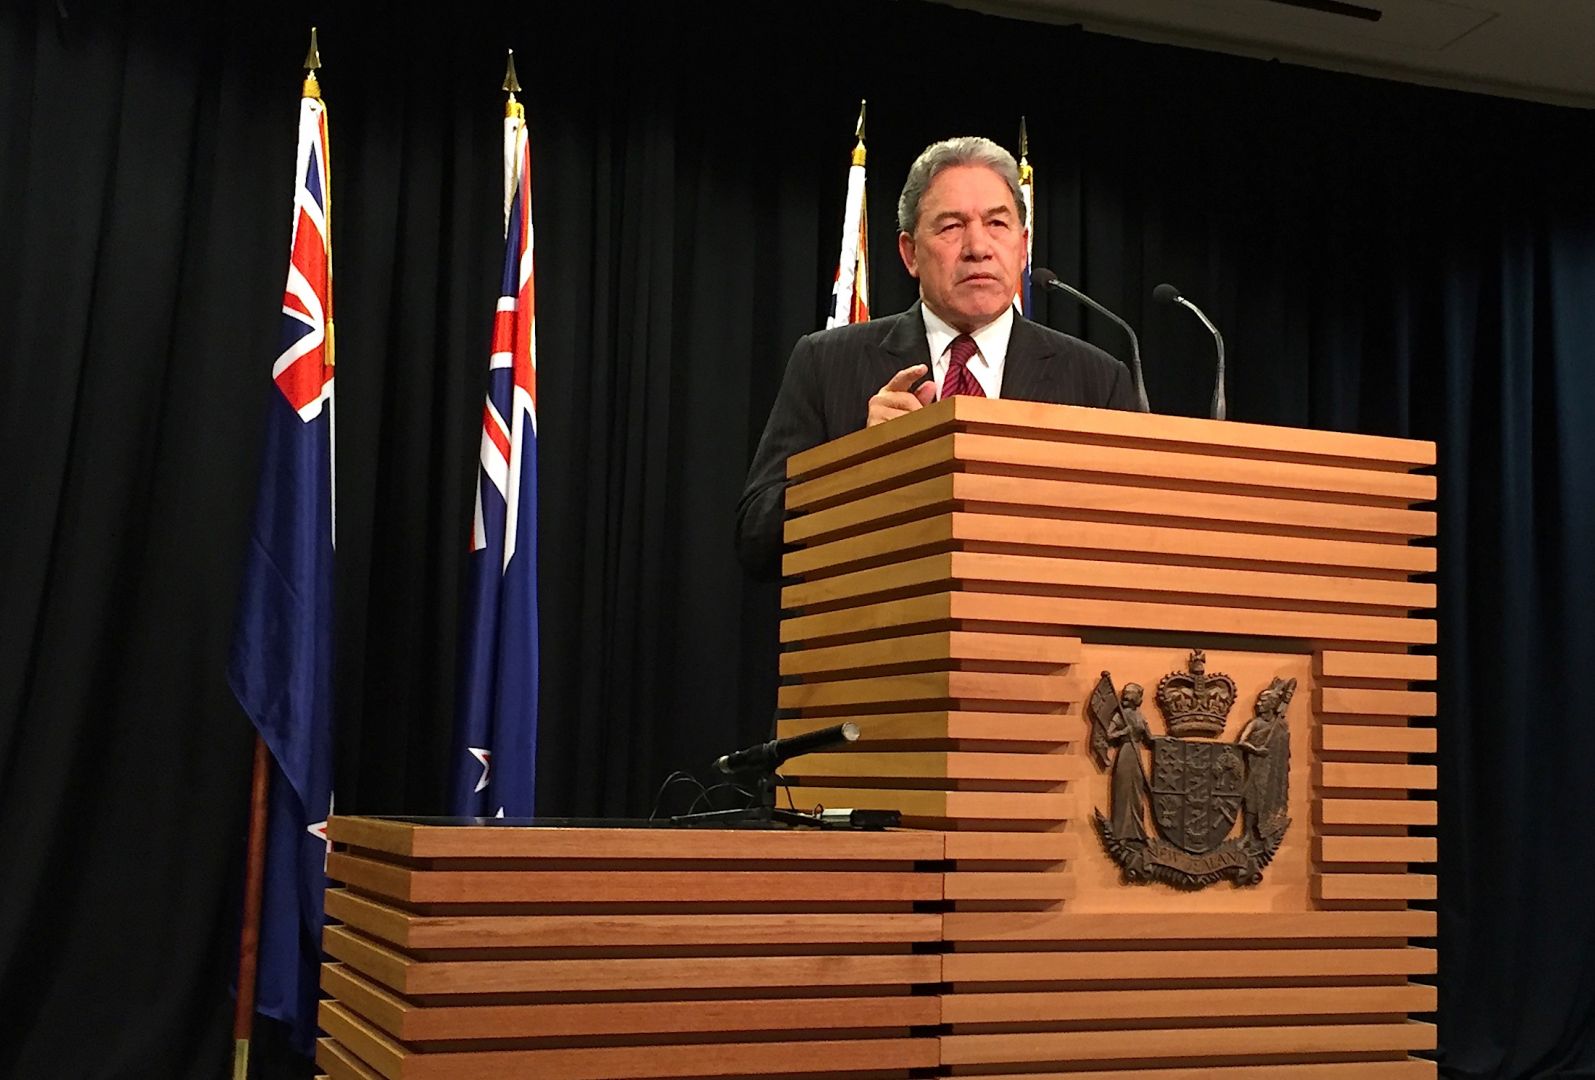 New Zealand First’s Winston Peters says a coalition announcement must wait